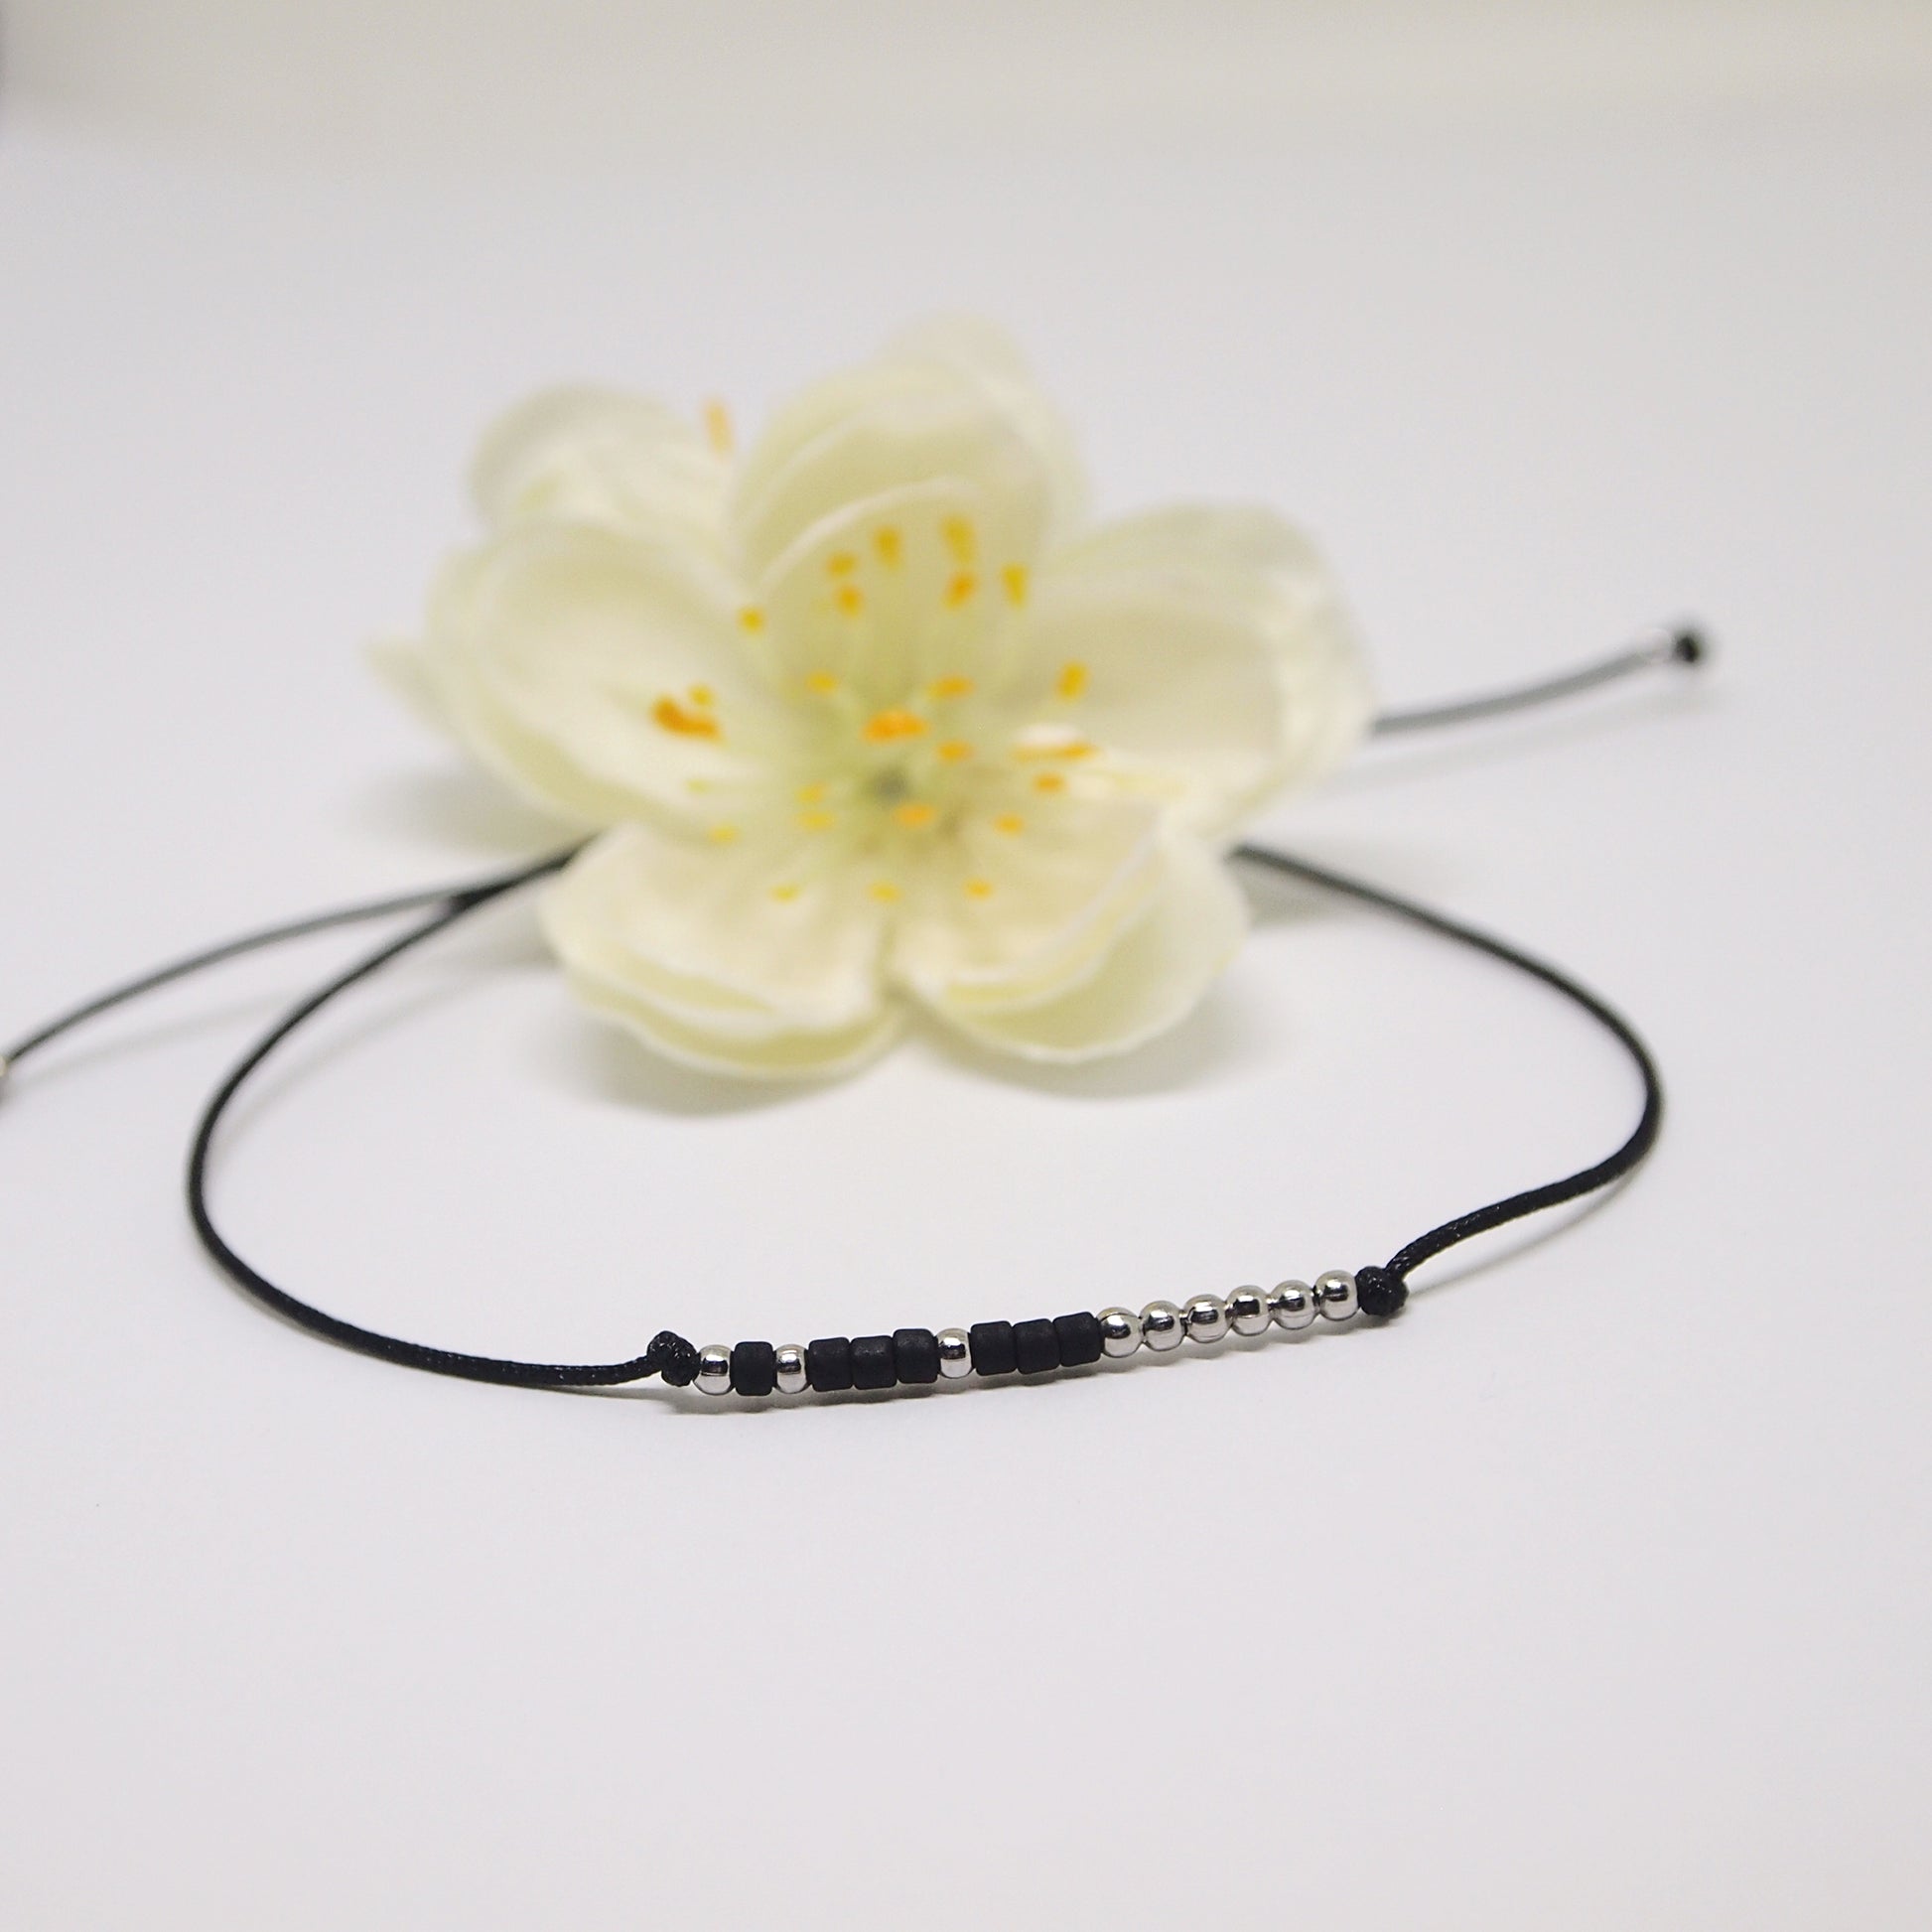 personalized morse code bracelet with seed beads, meaningful gift for her